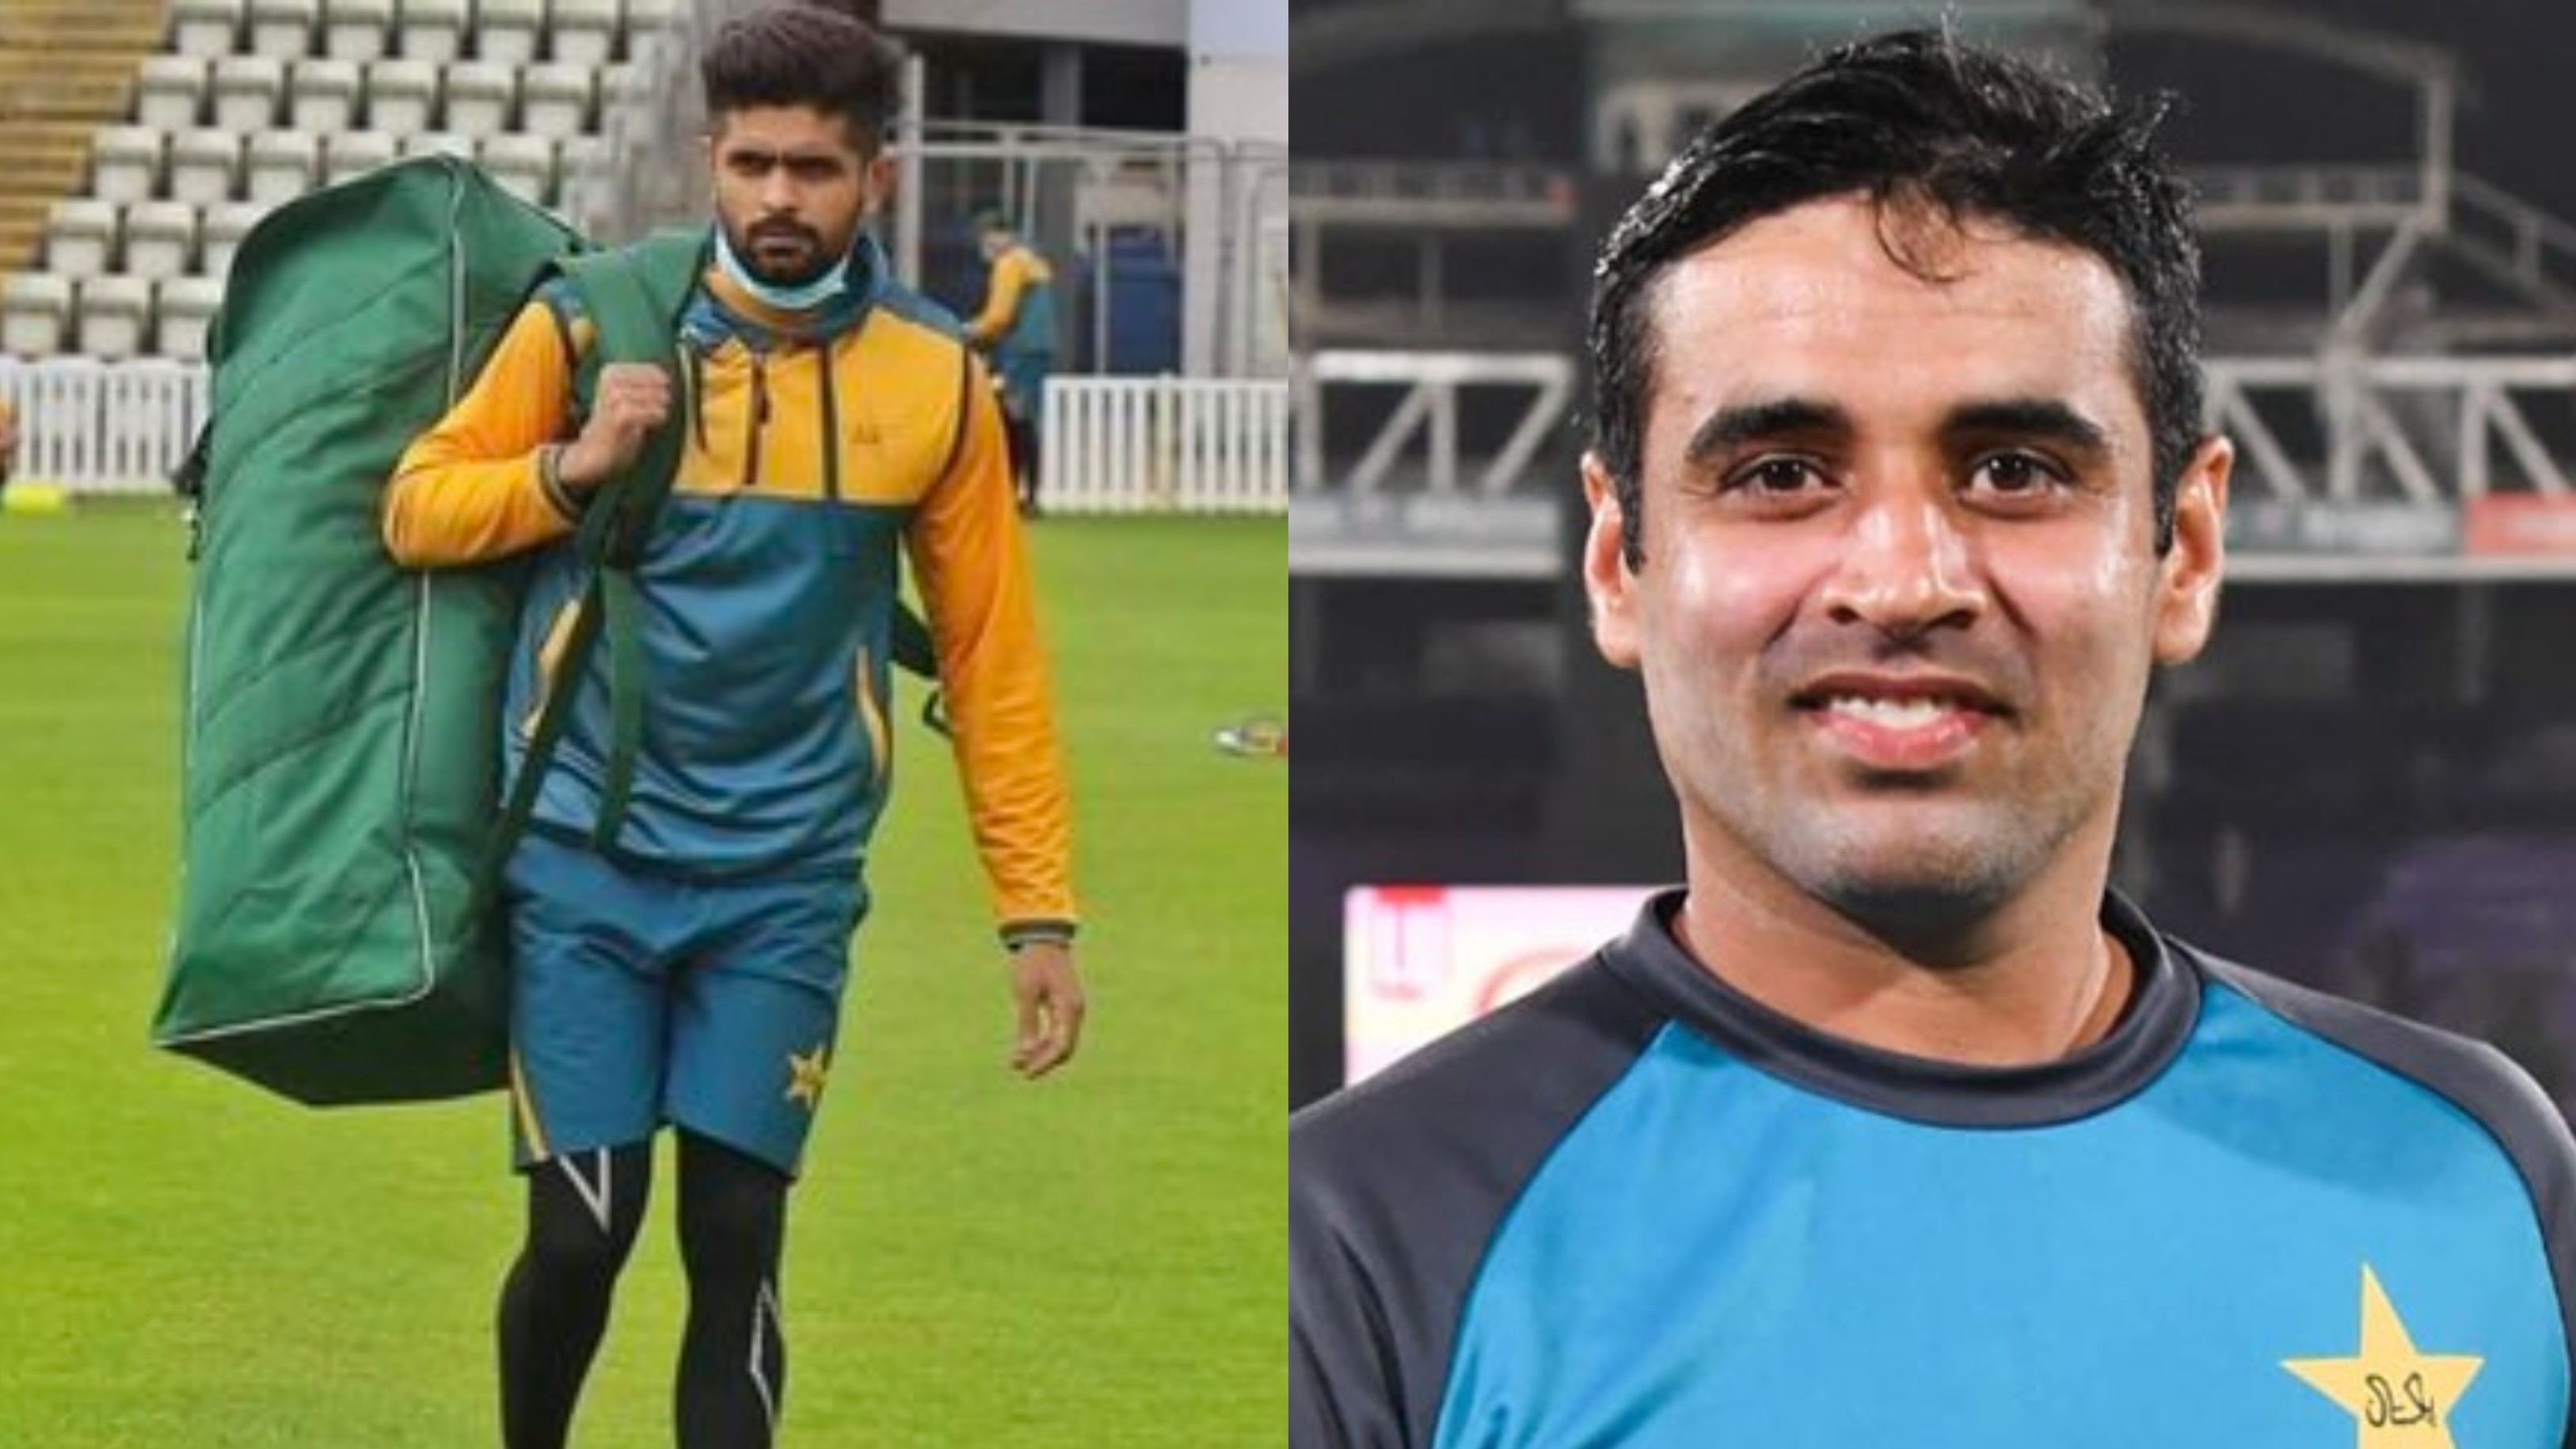 ENG v PAK 2020: Expectations will be high from Babar Azam due to white-ball captaincy, says Abid Ali